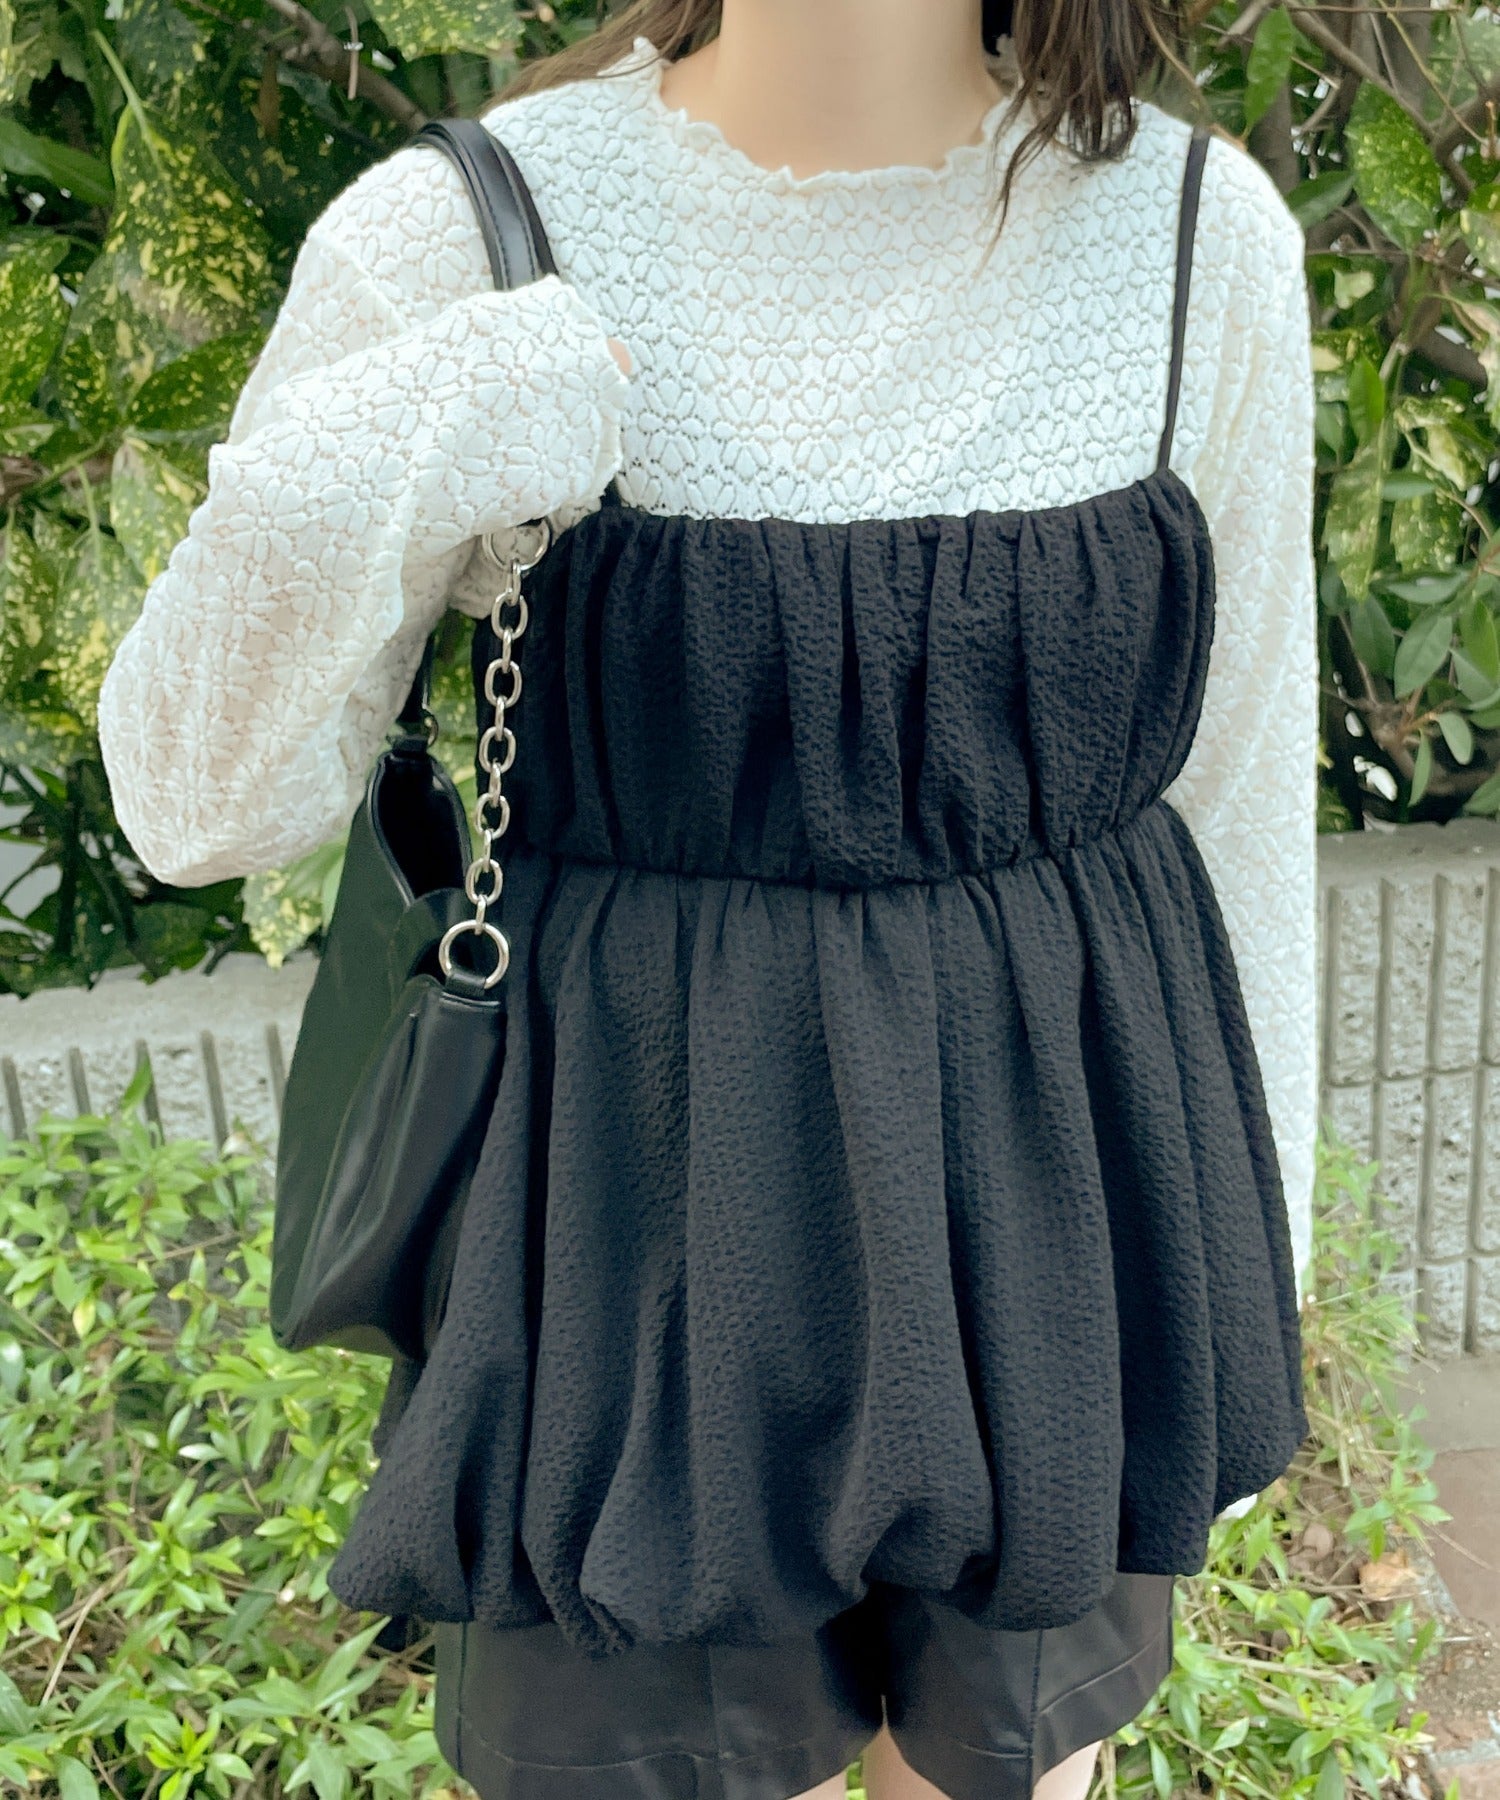 Angelic Pretty パーカー カットソー 2枚セット-